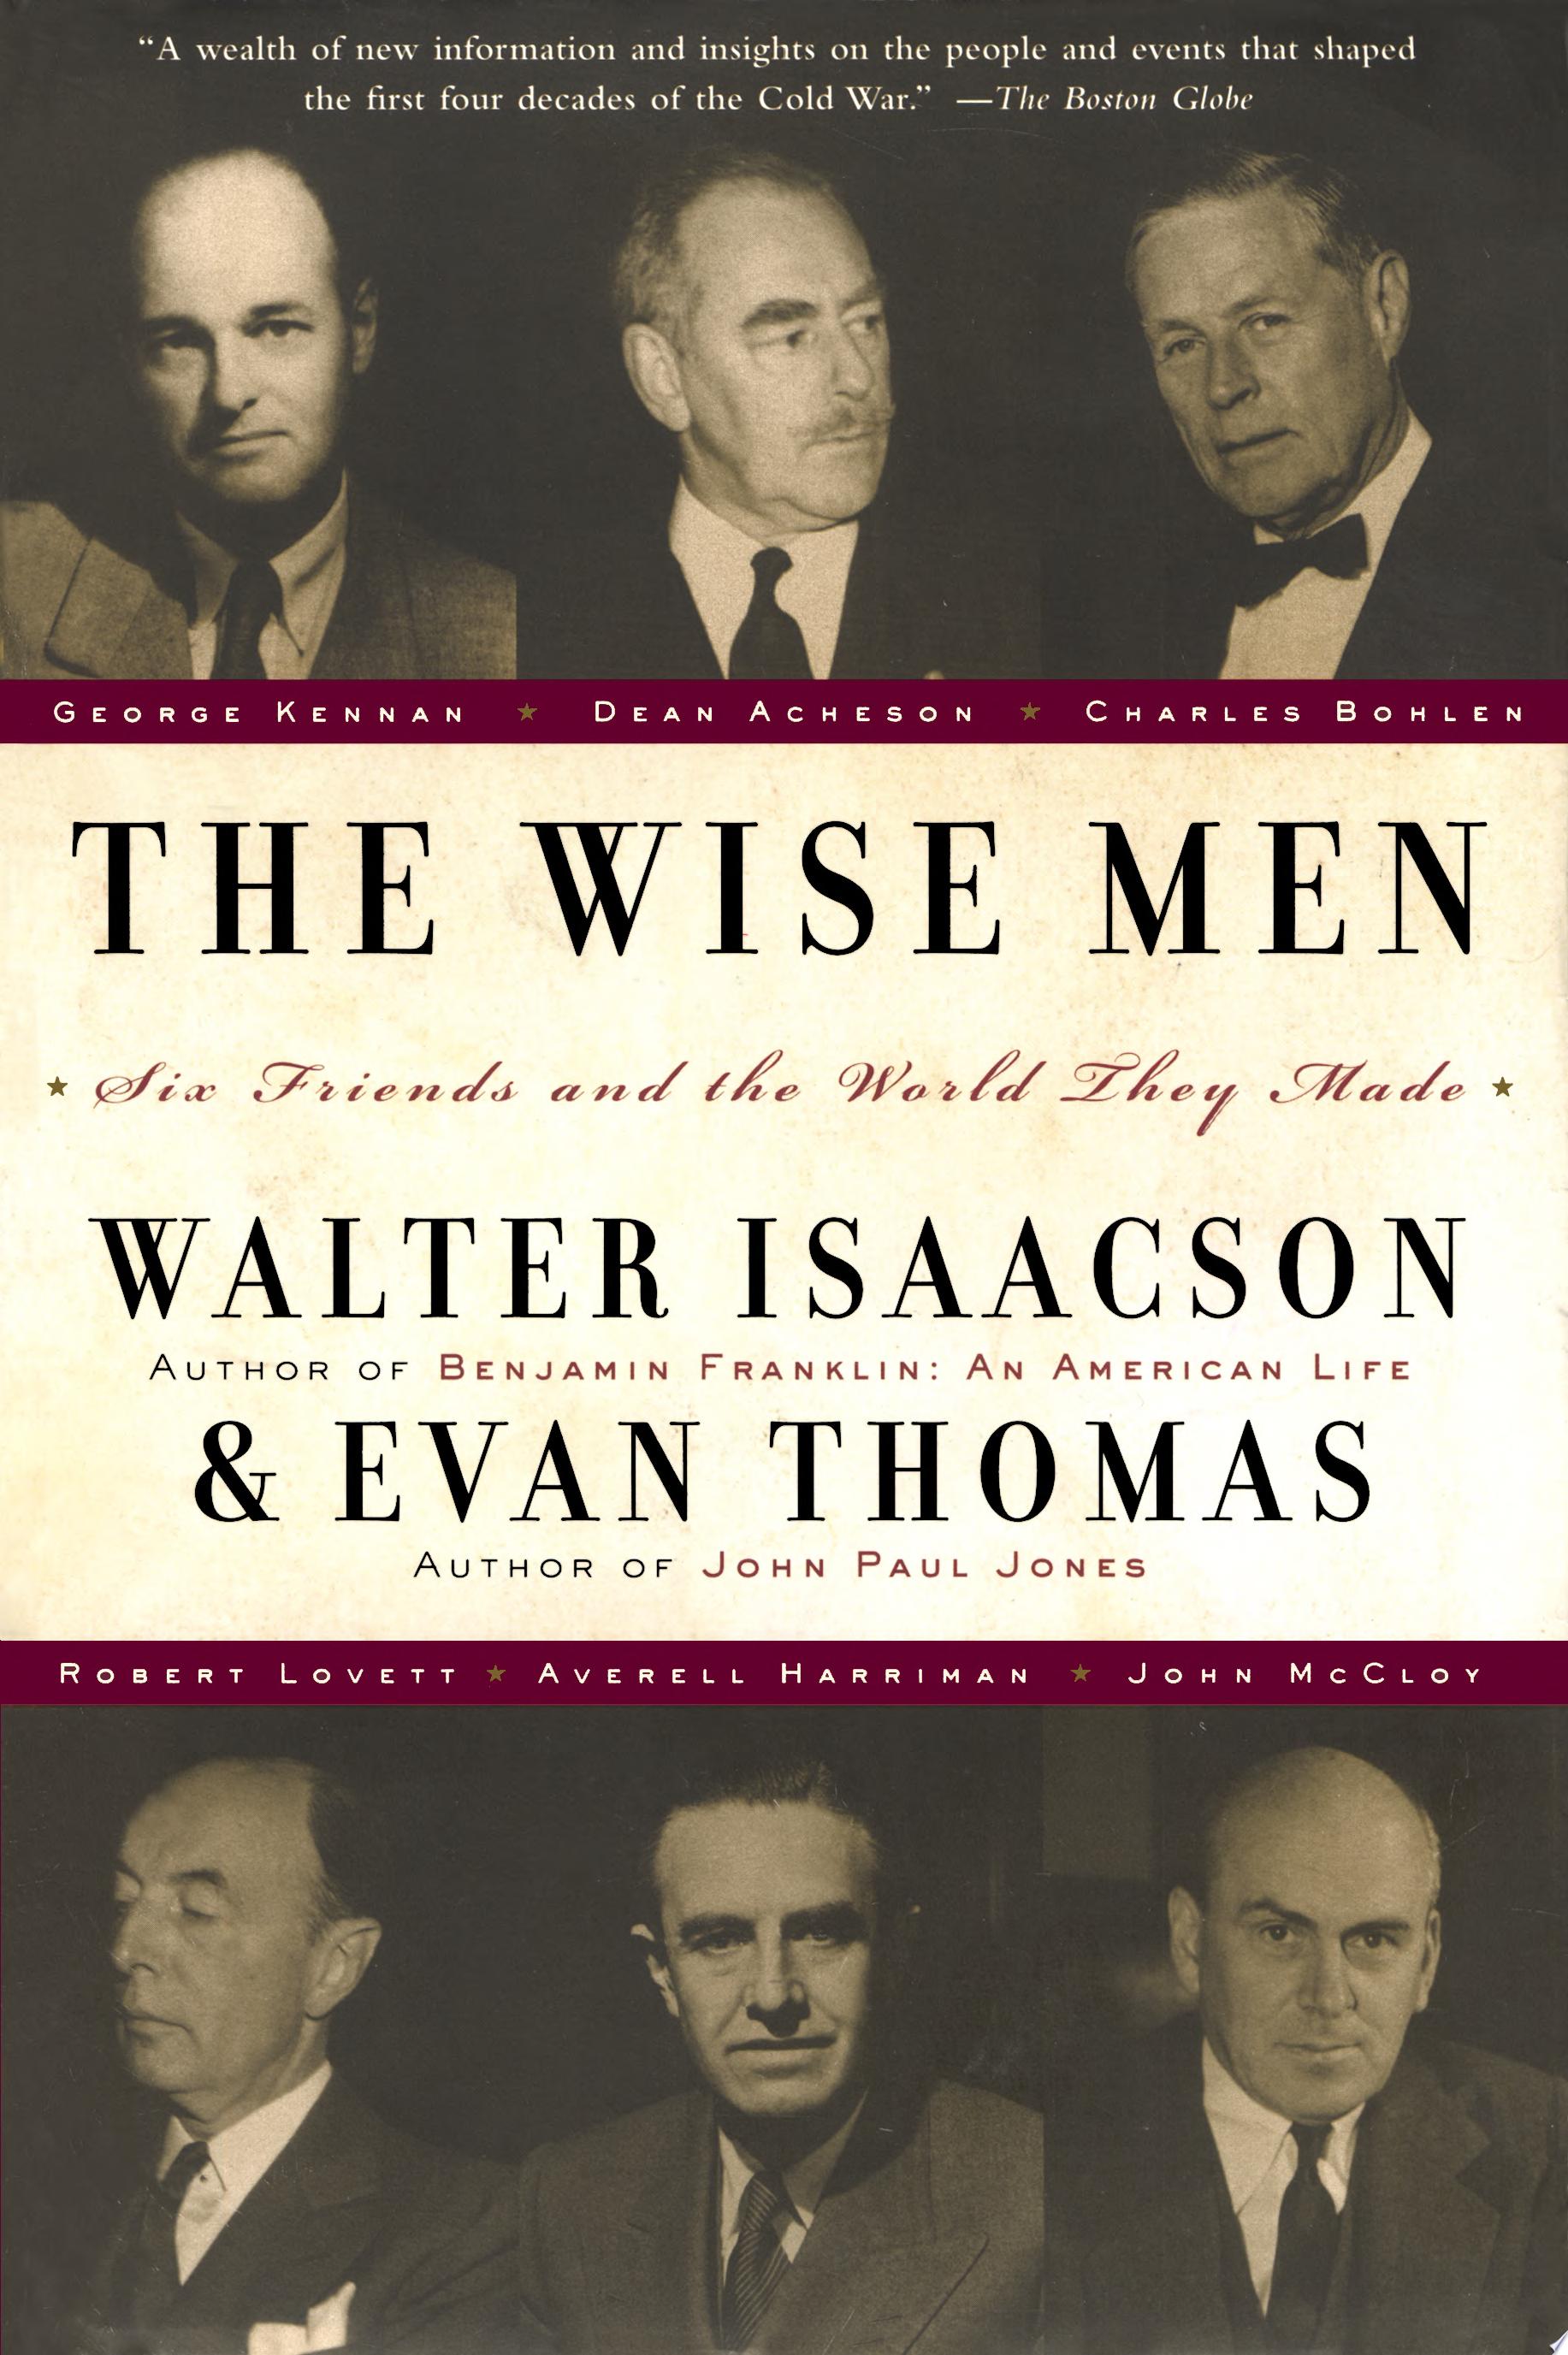 Image for "The Wise Men"